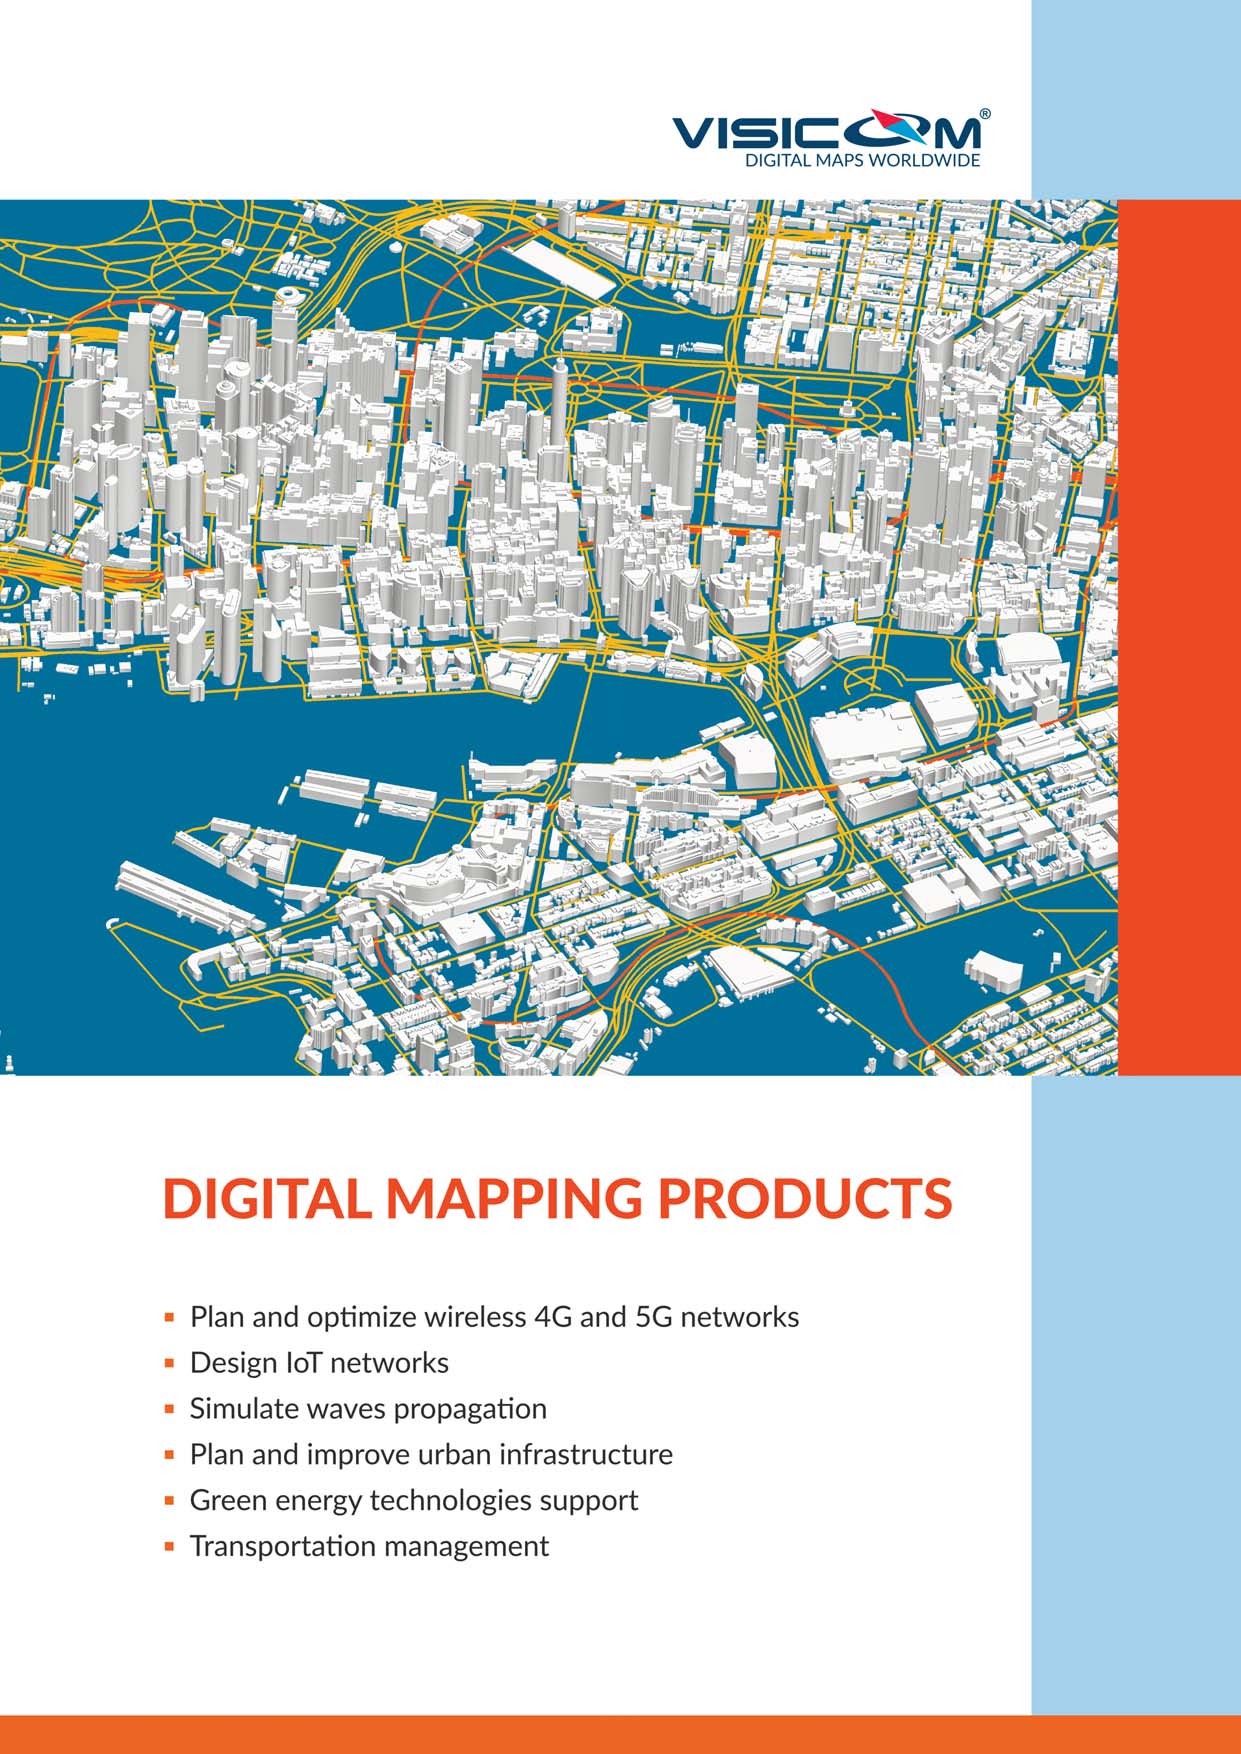 Digital_Mapping_Products_Visicom_2020